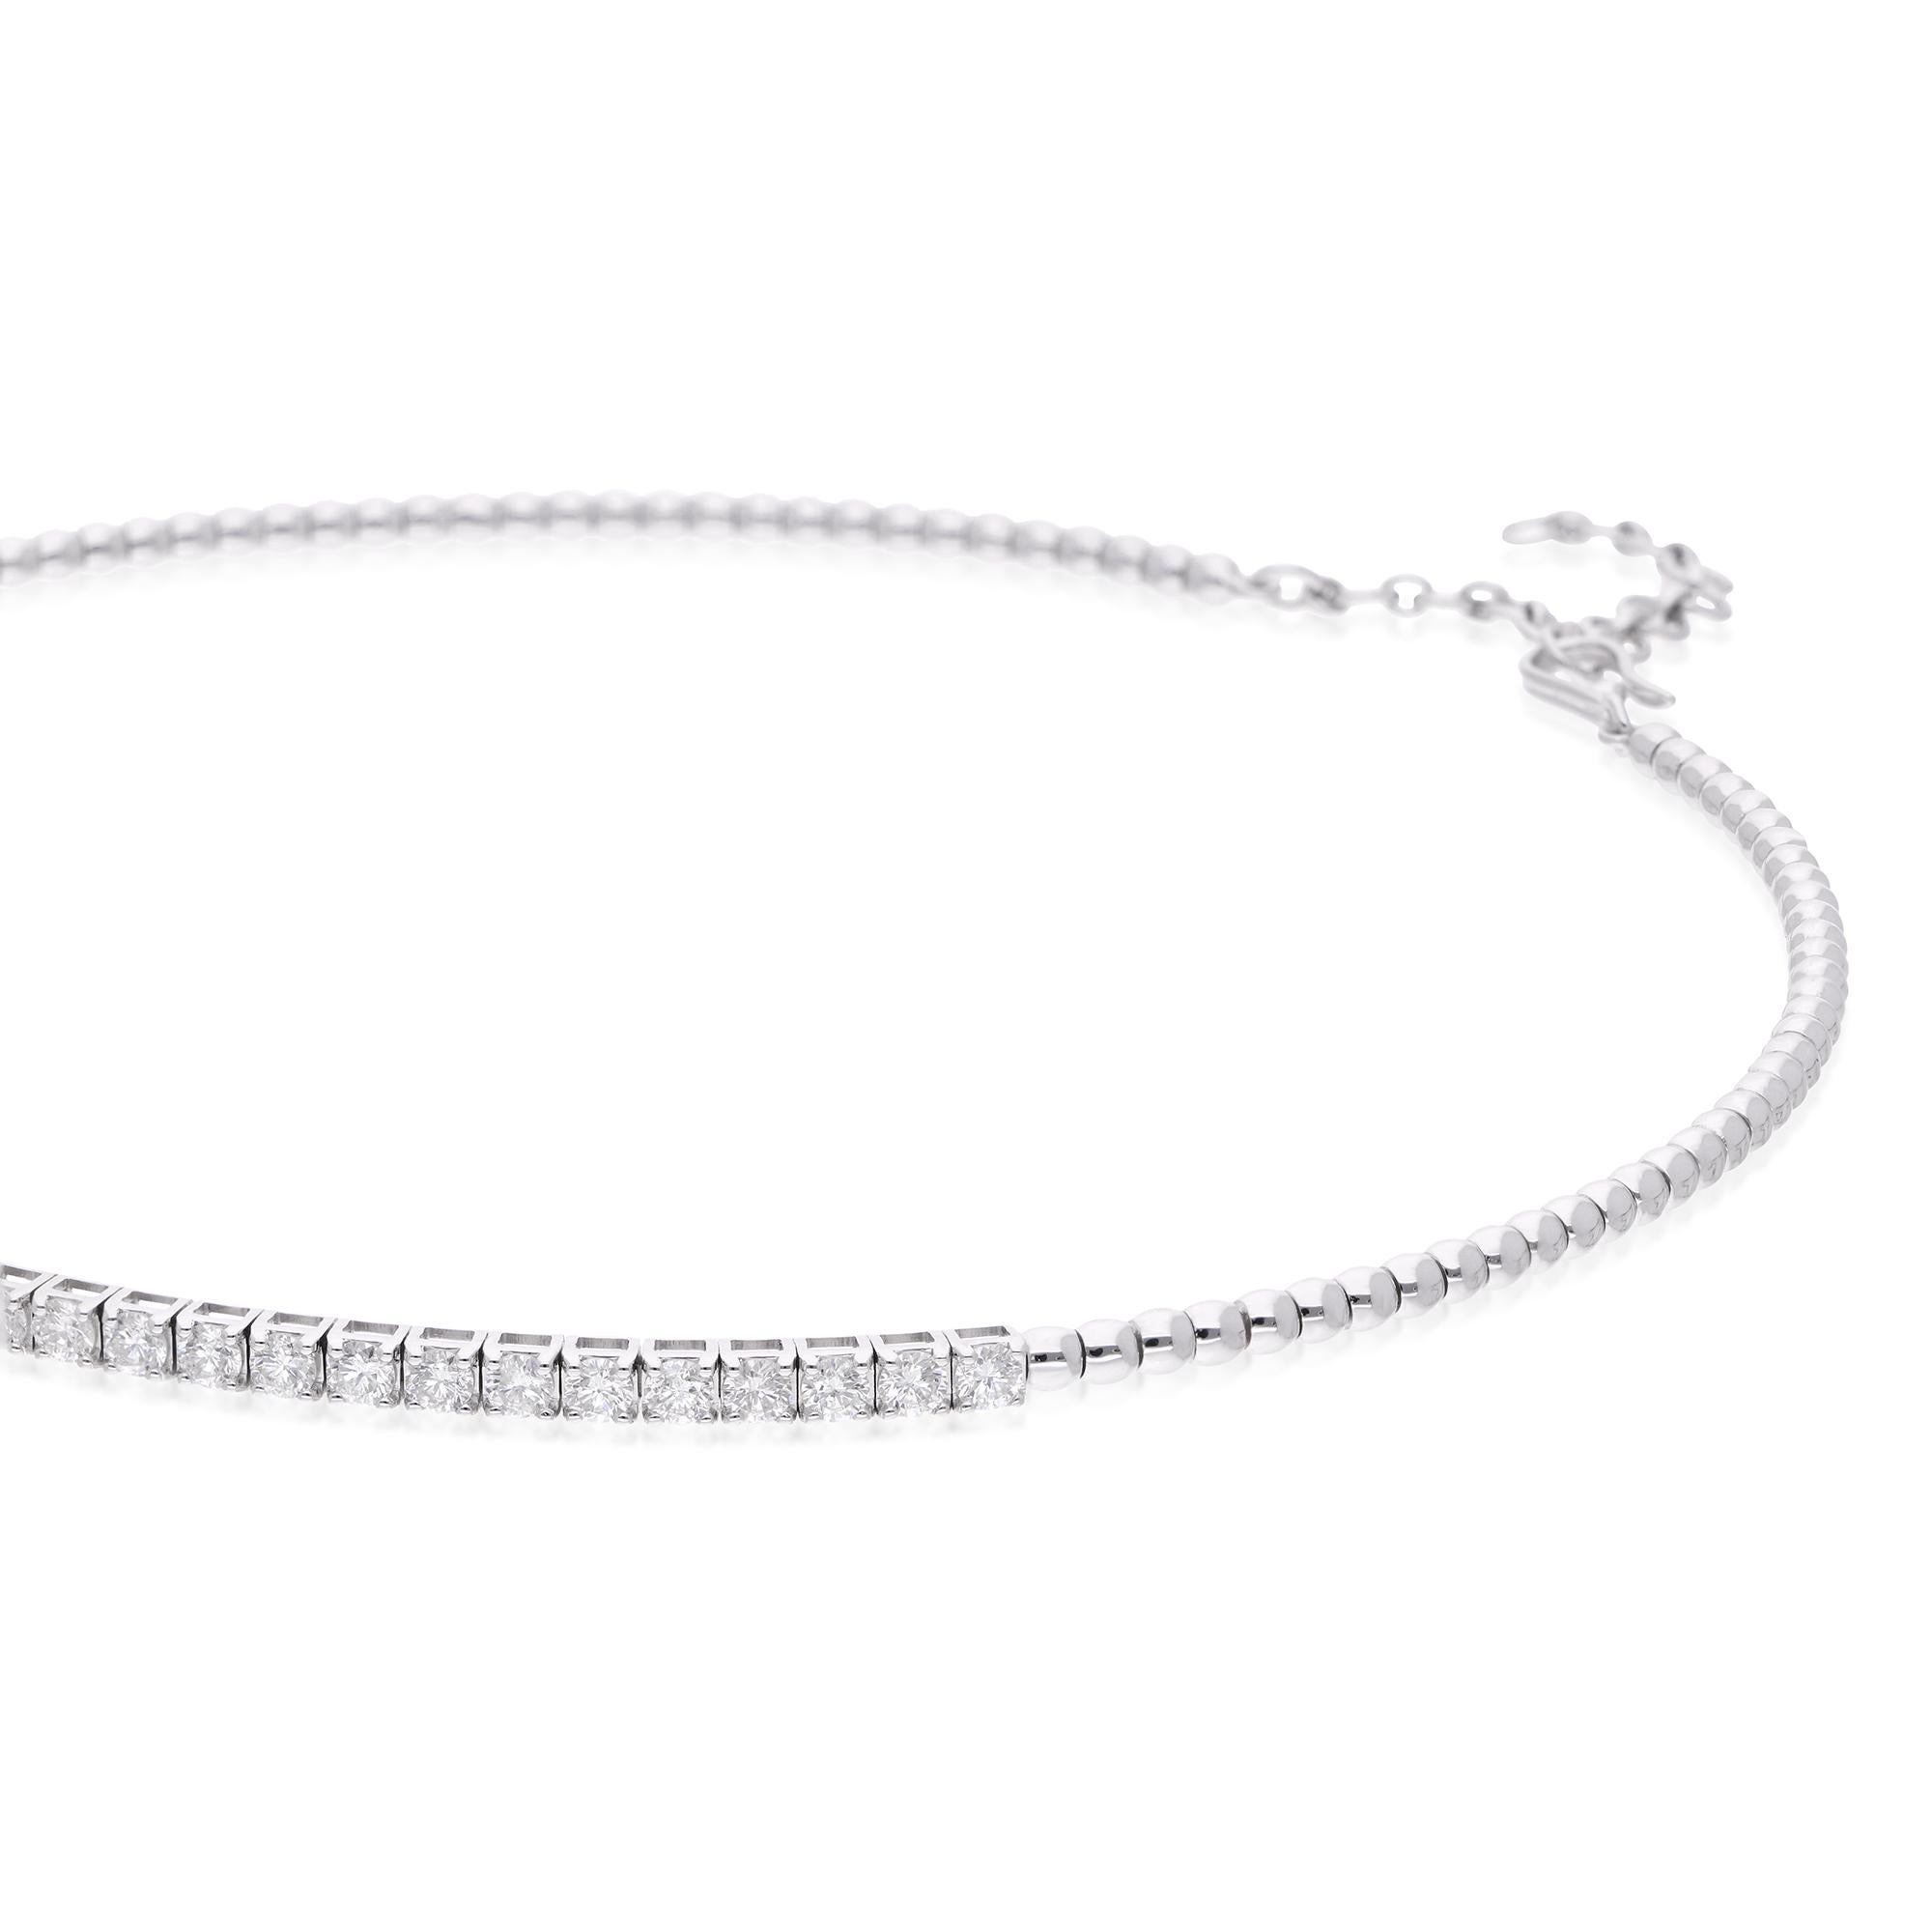 Step into a realm of refined elegance with this Natural 3.30 Carat SI/HI Diamond Choker Necklace, meticulously crafted in exquisite 18 Karat White Gold. This stunning necklace is a masterpiece of sophistication and luxury, destined to become the